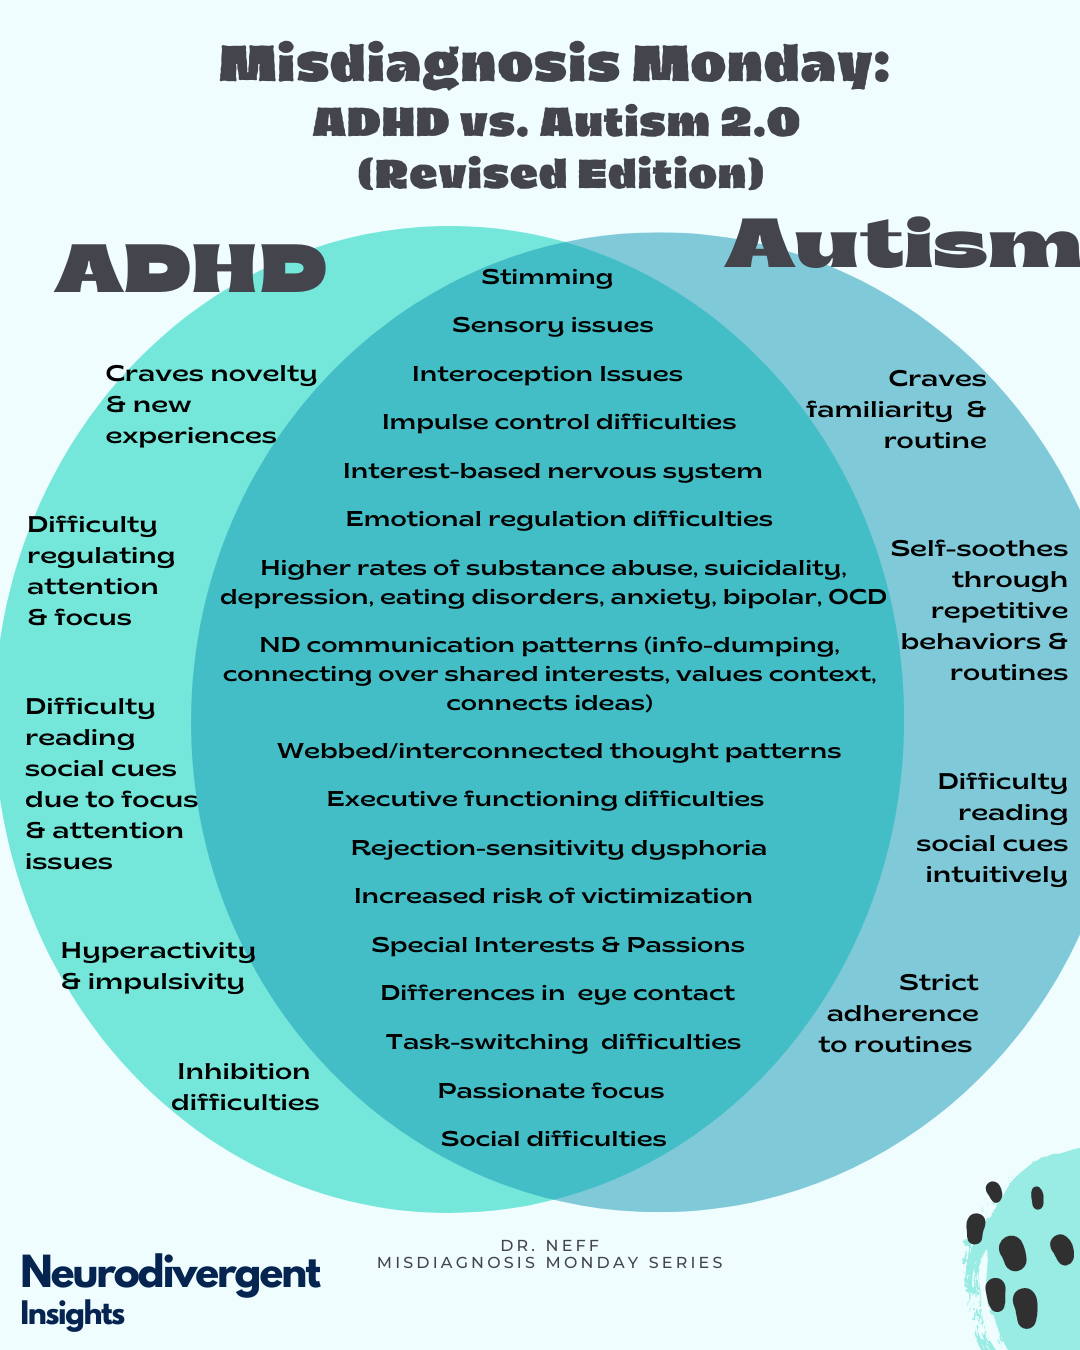 Can ADHD be misdiagnosed for autism?